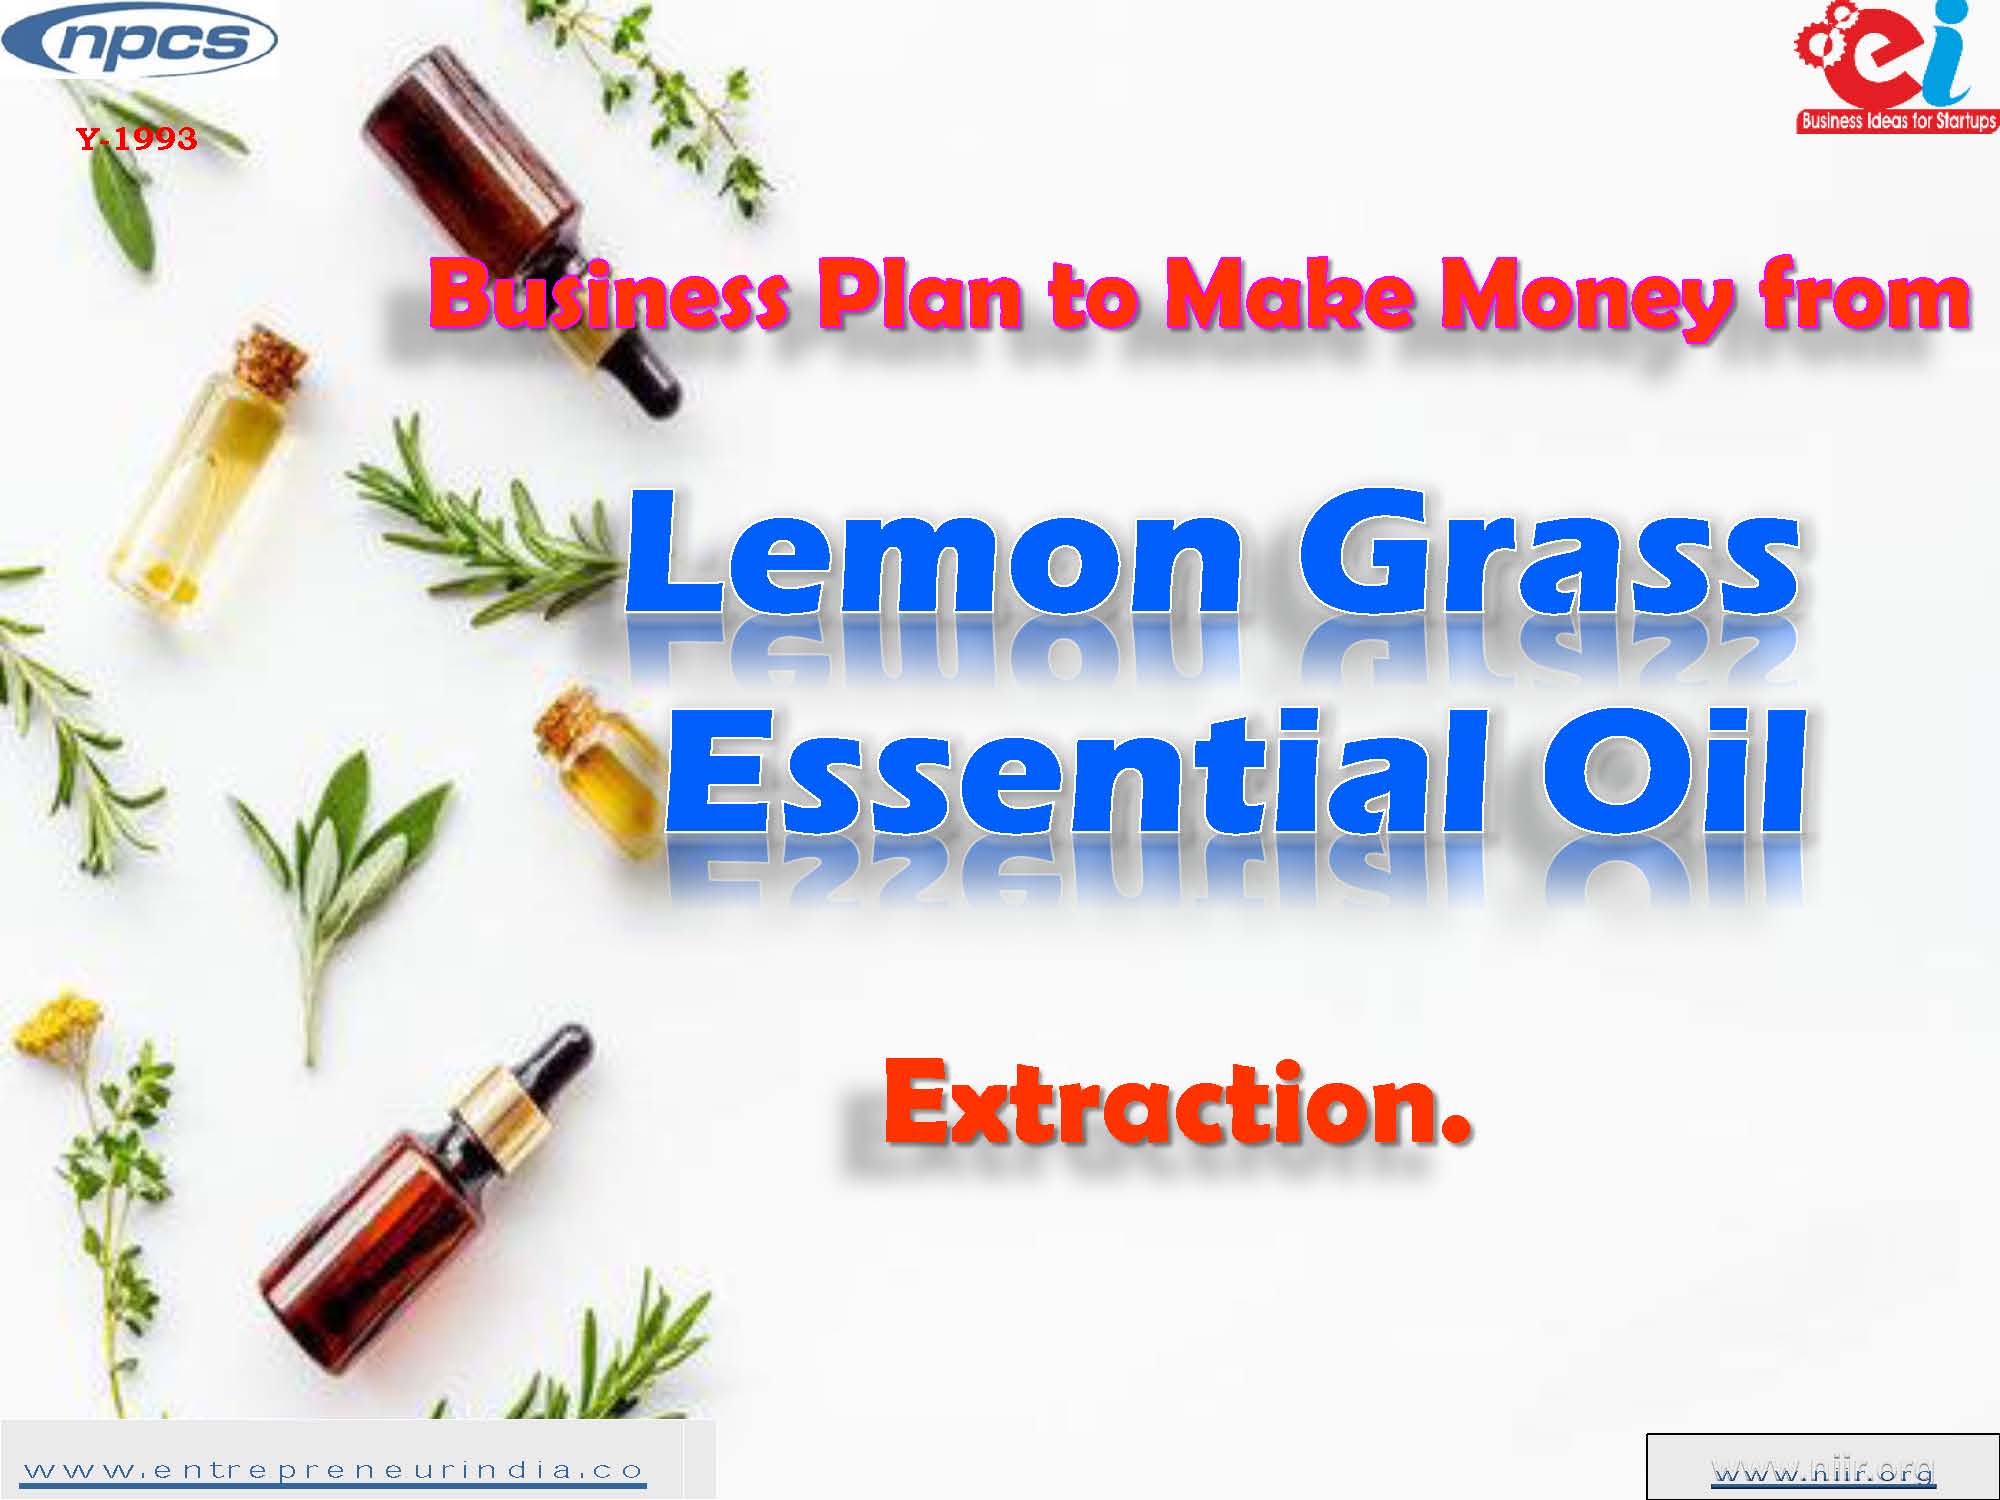 Business Plan to Make Money from Lemon Grass Essential Oil Extraction